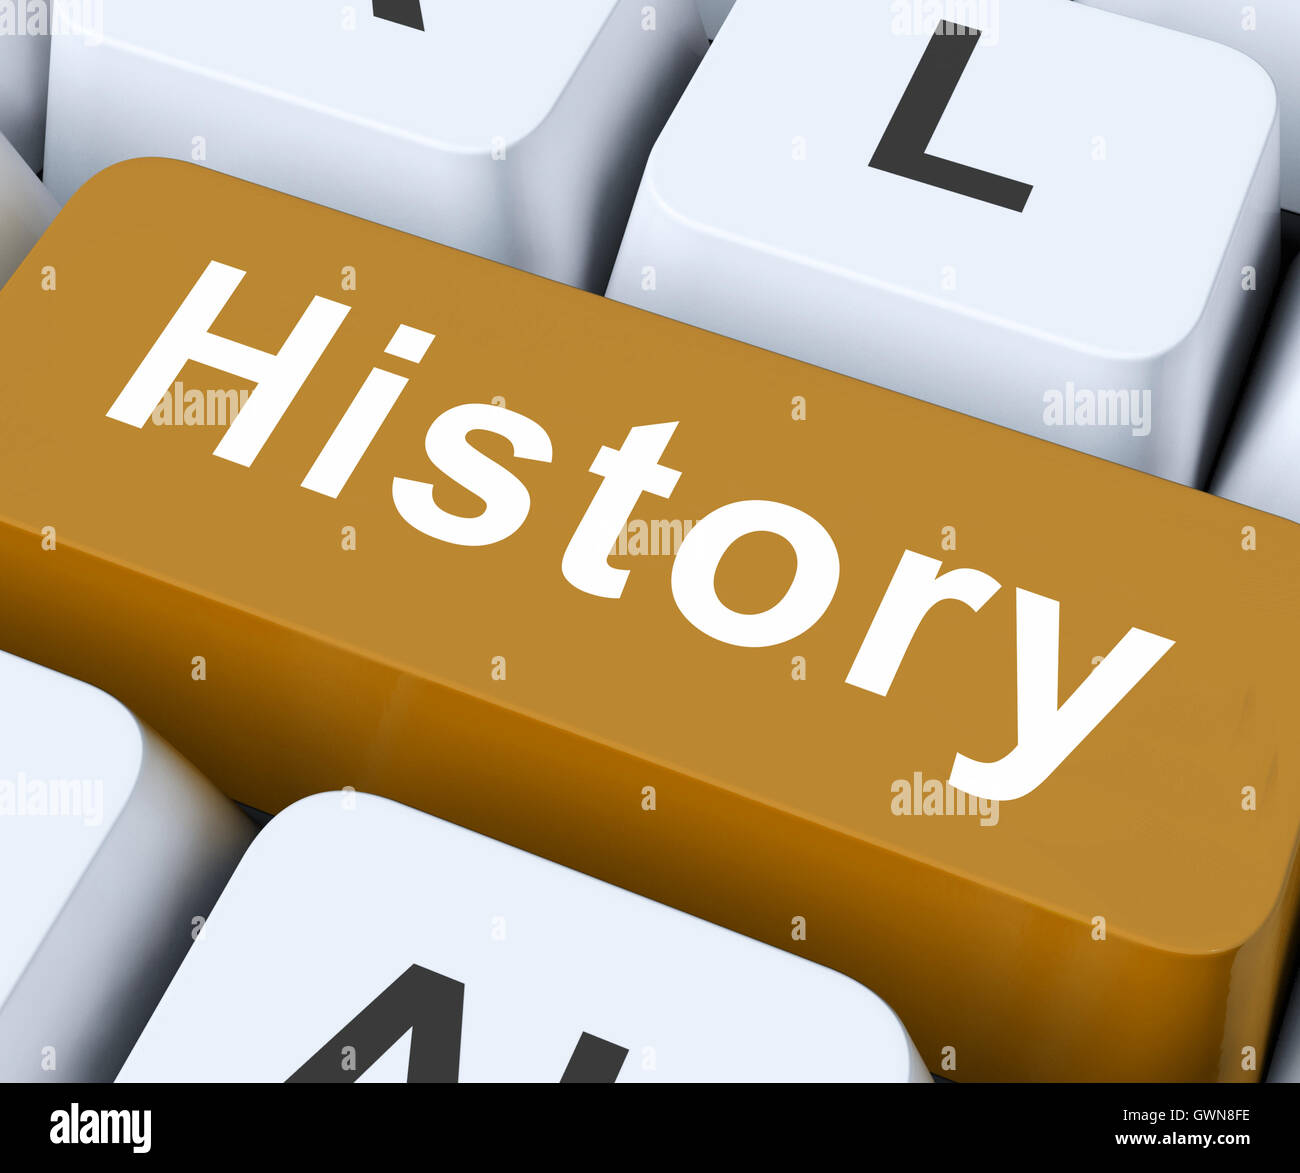 History Key Means Past Or Old Days Stock Photo